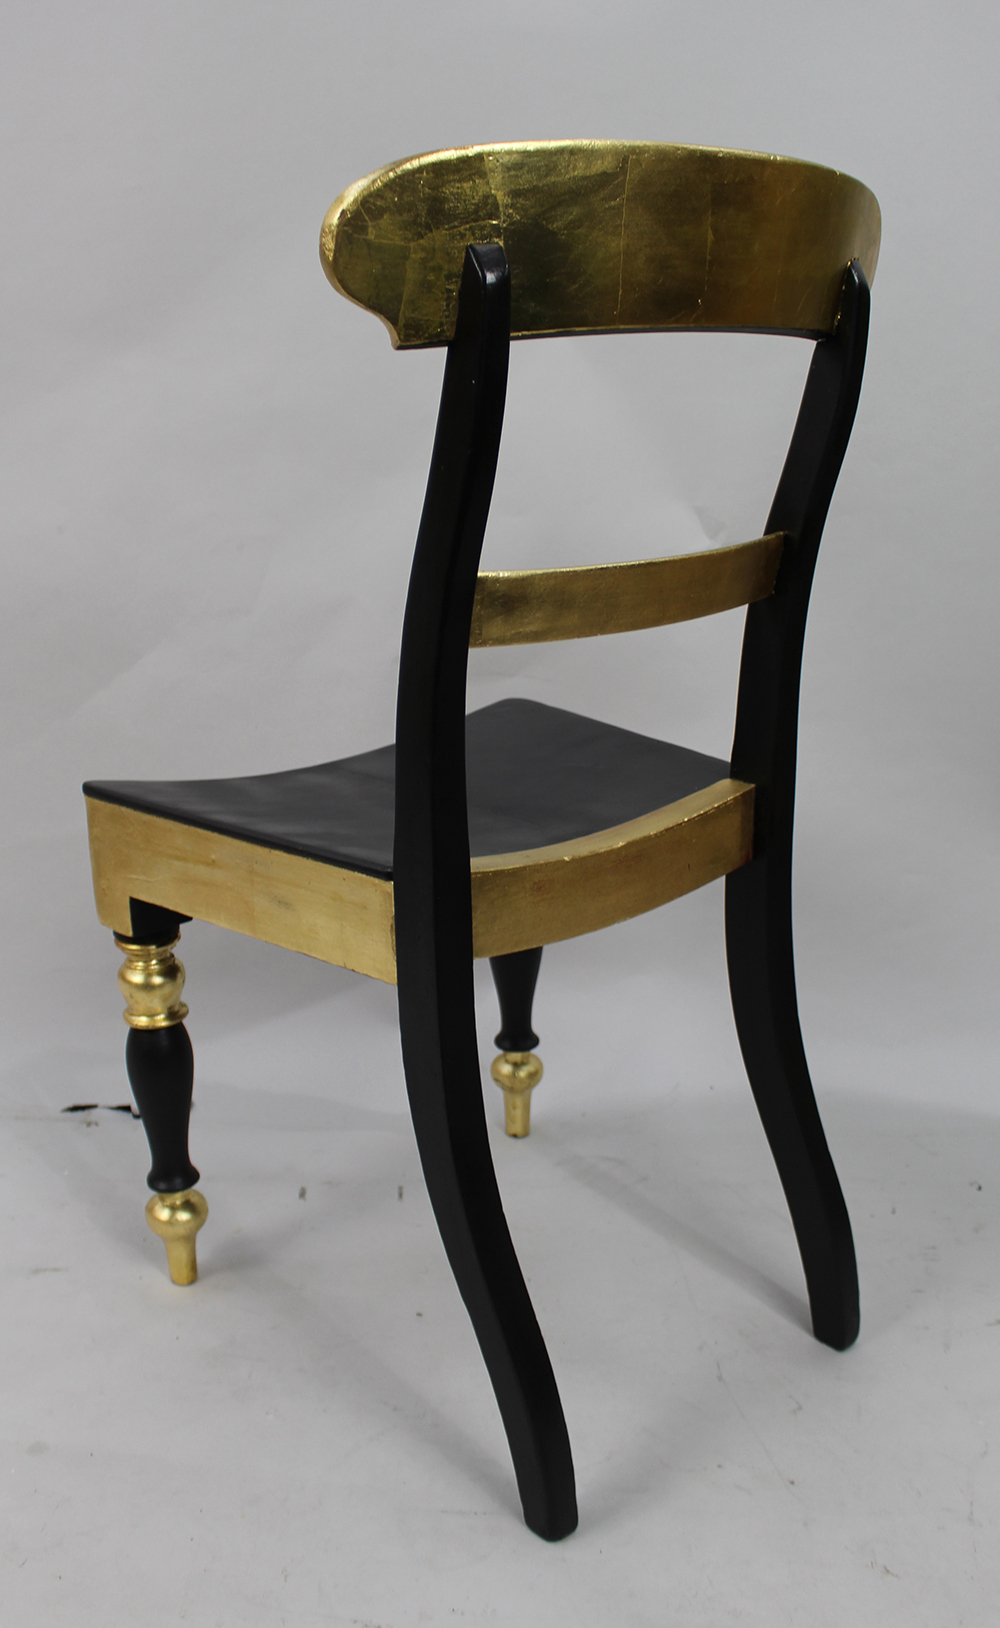 Painted Black & Gilt Desk Occasional Chair - Image 4 of 4